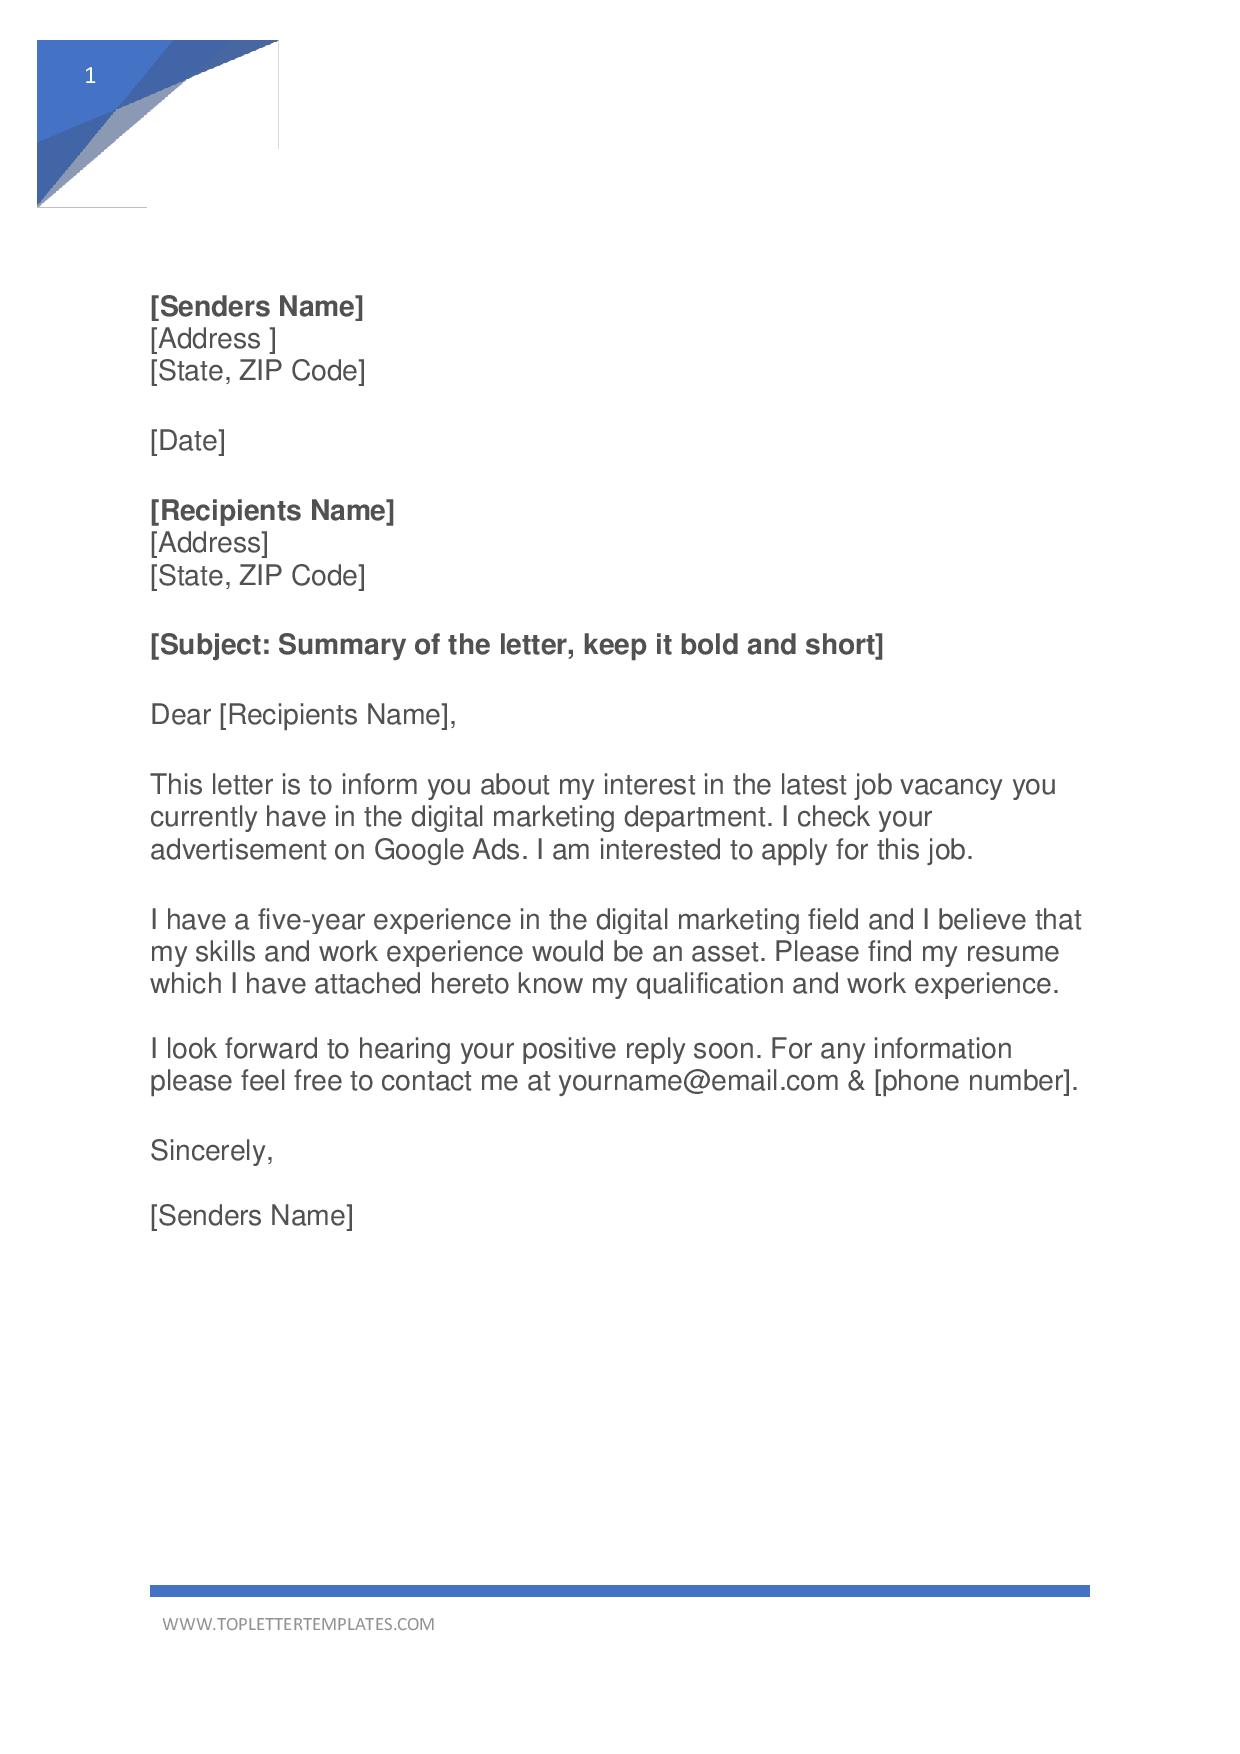 Simple Cover Letter Examples from toplettertemplates.com